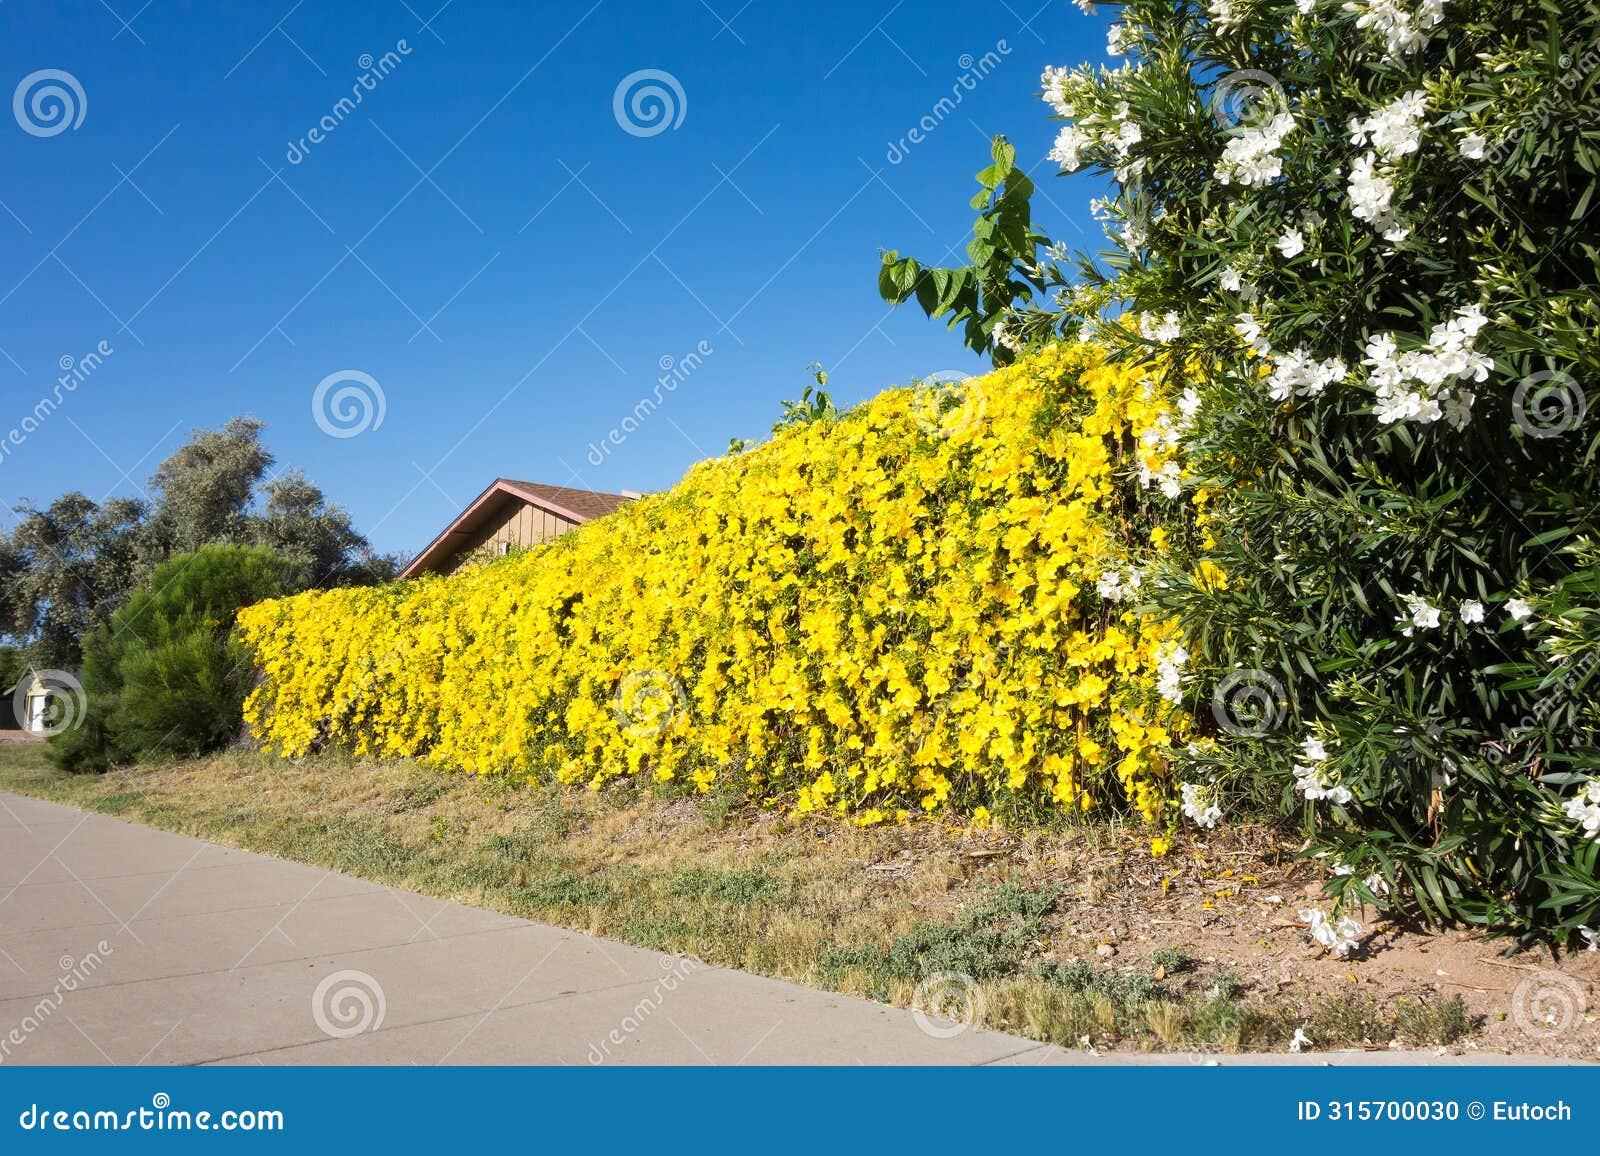 blooming oleander and dolichandra unguis-cati in a colorful hedge, phoenix, az